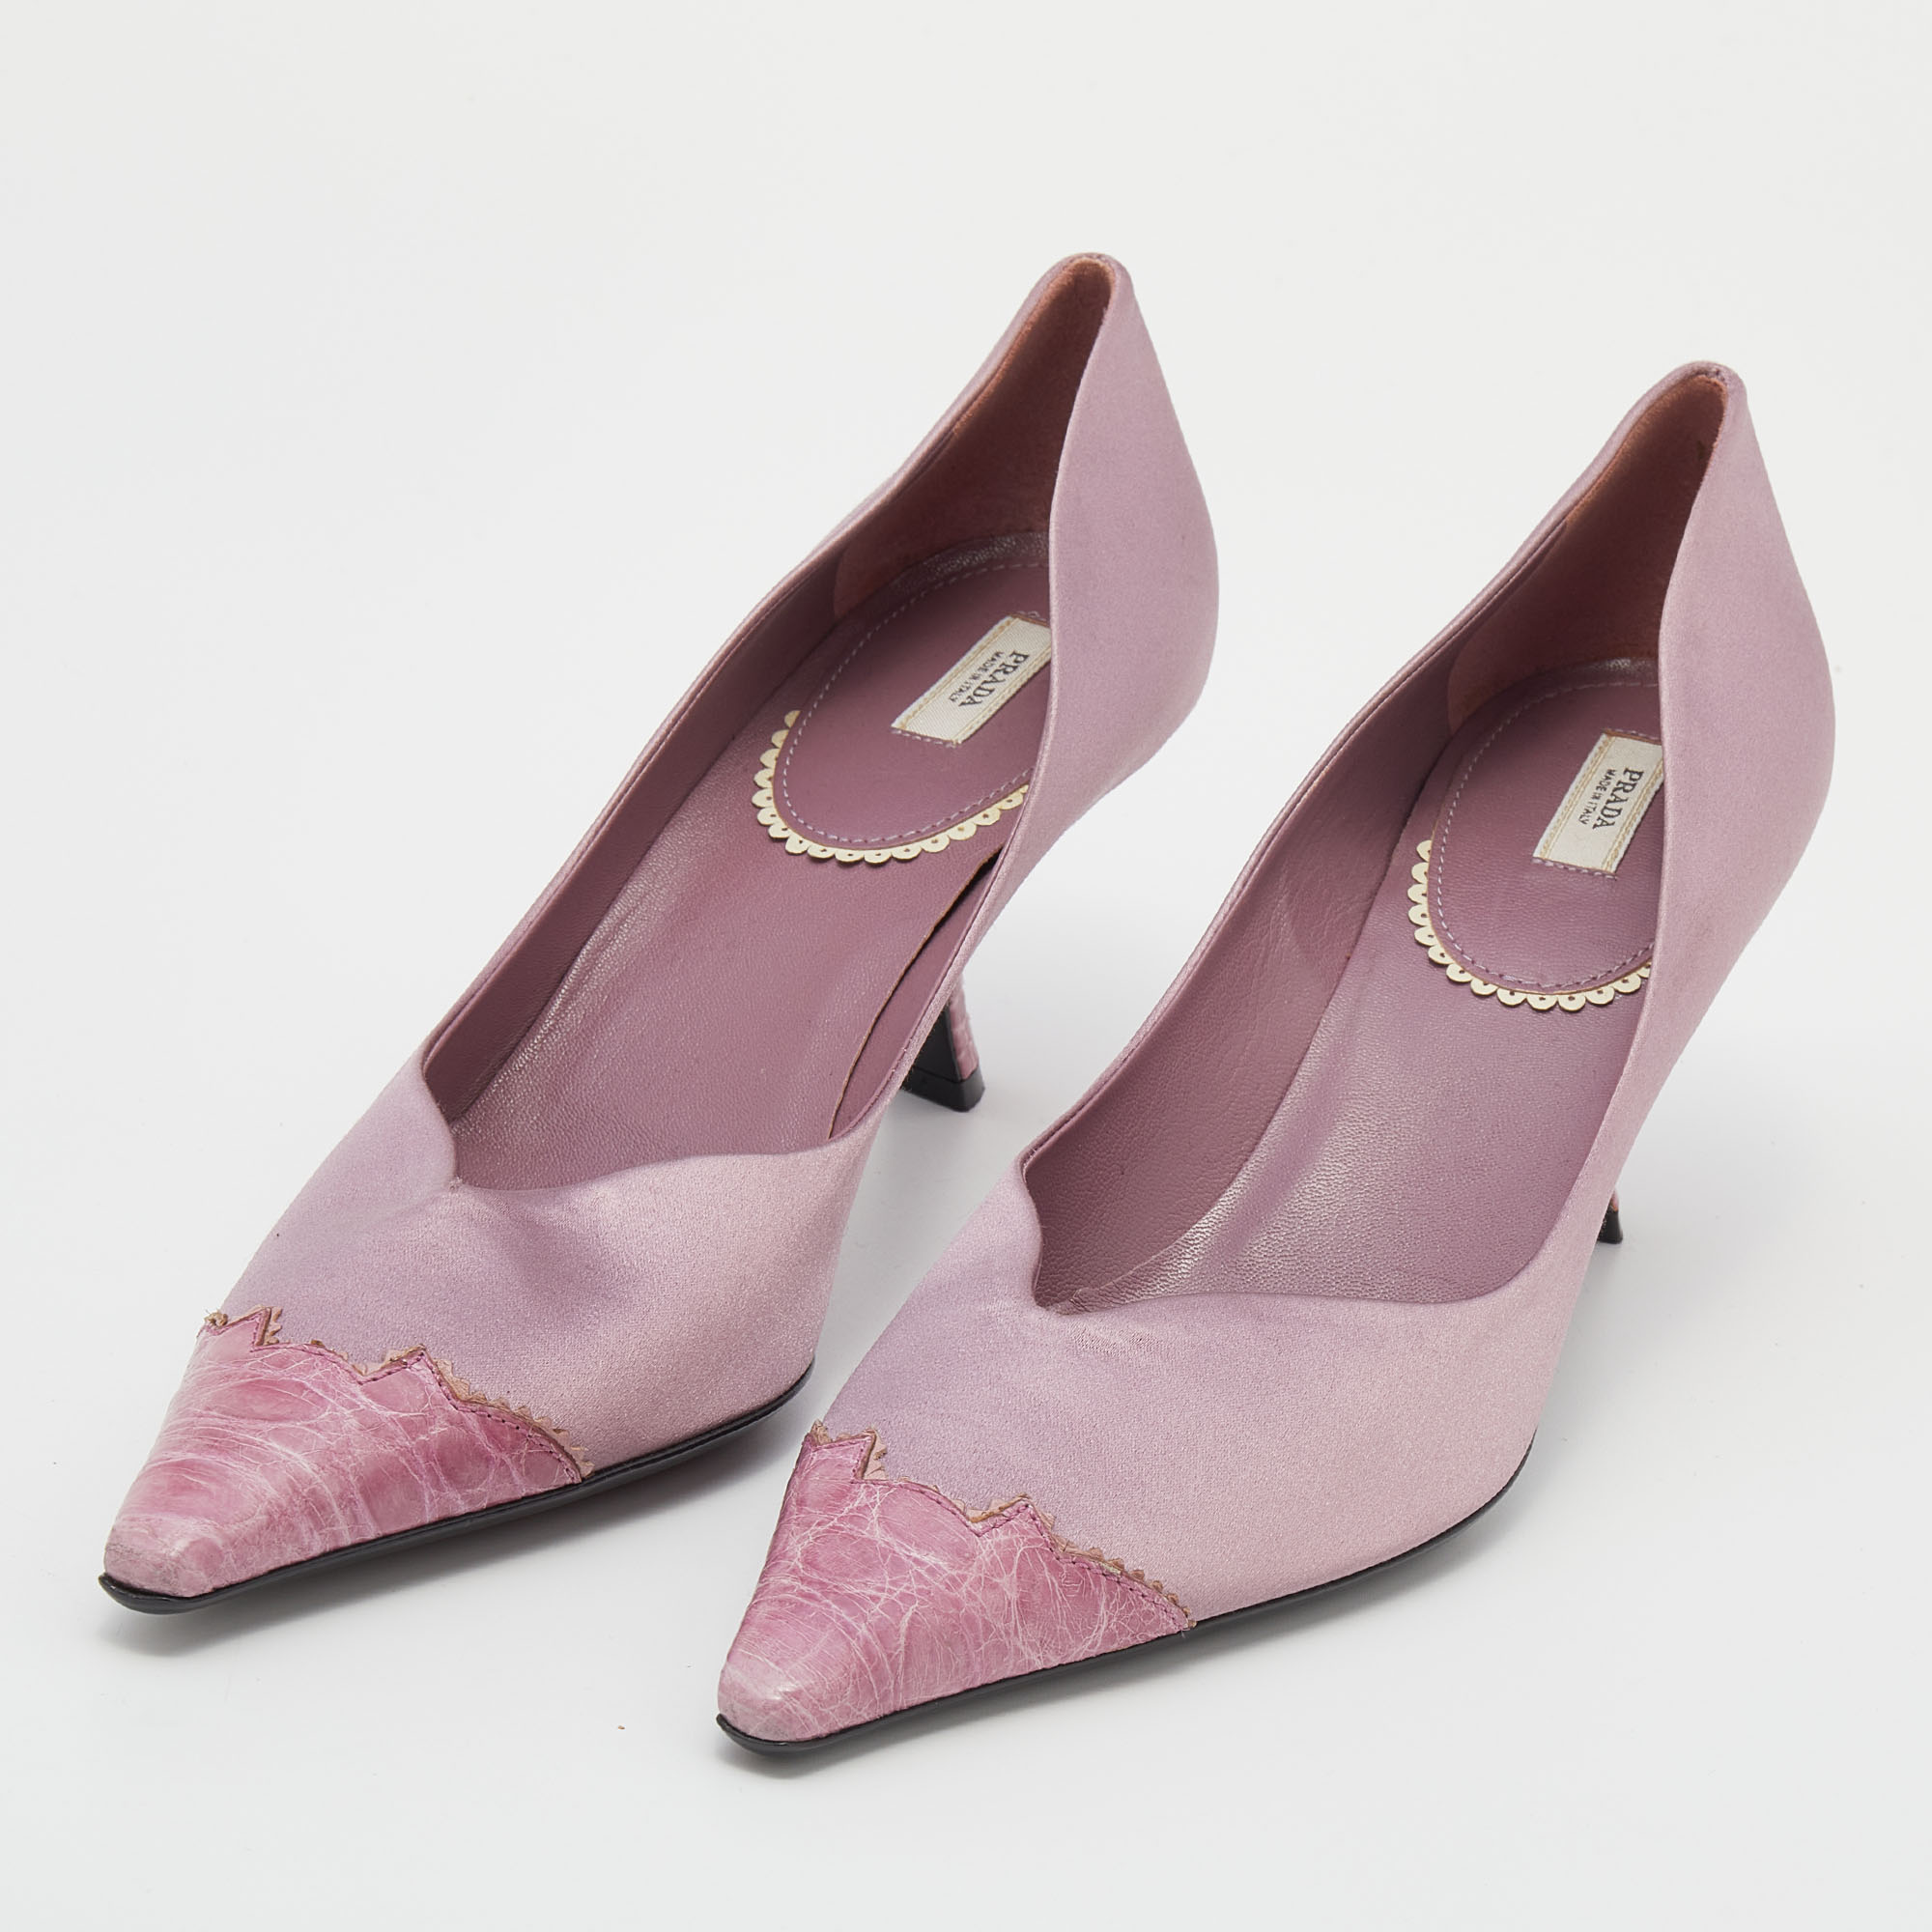 

Prada Pink Satin And Crocodile Leather Pointed Toe Pumps Size